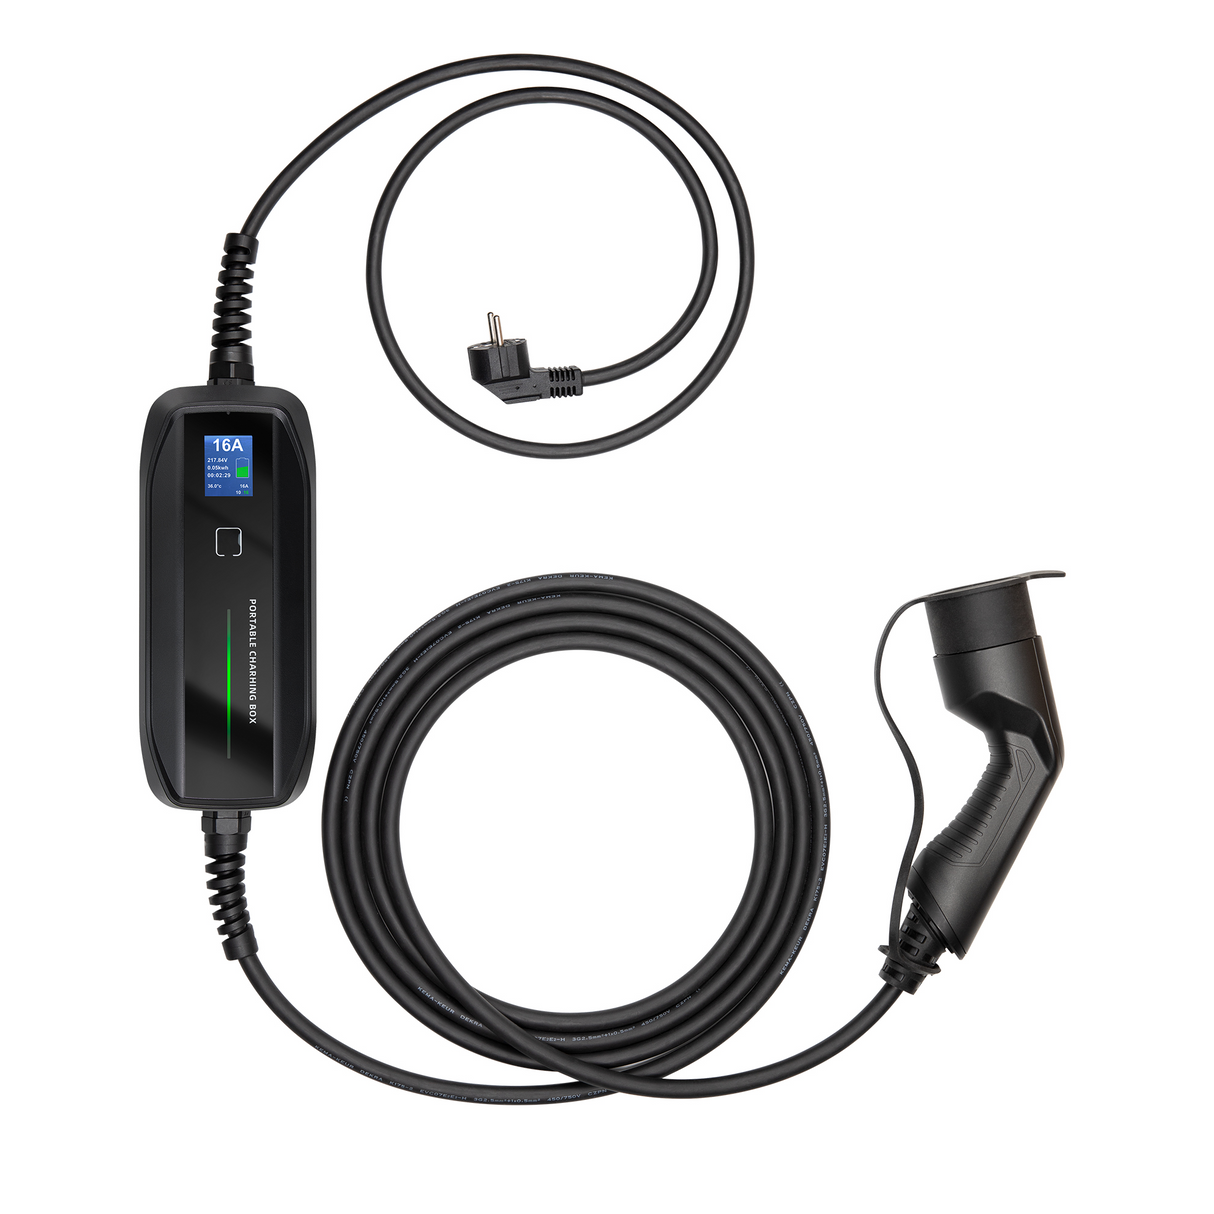 Mobile Charger Tesla Model 3 - Besen with LCD - Type 2 to Schuko